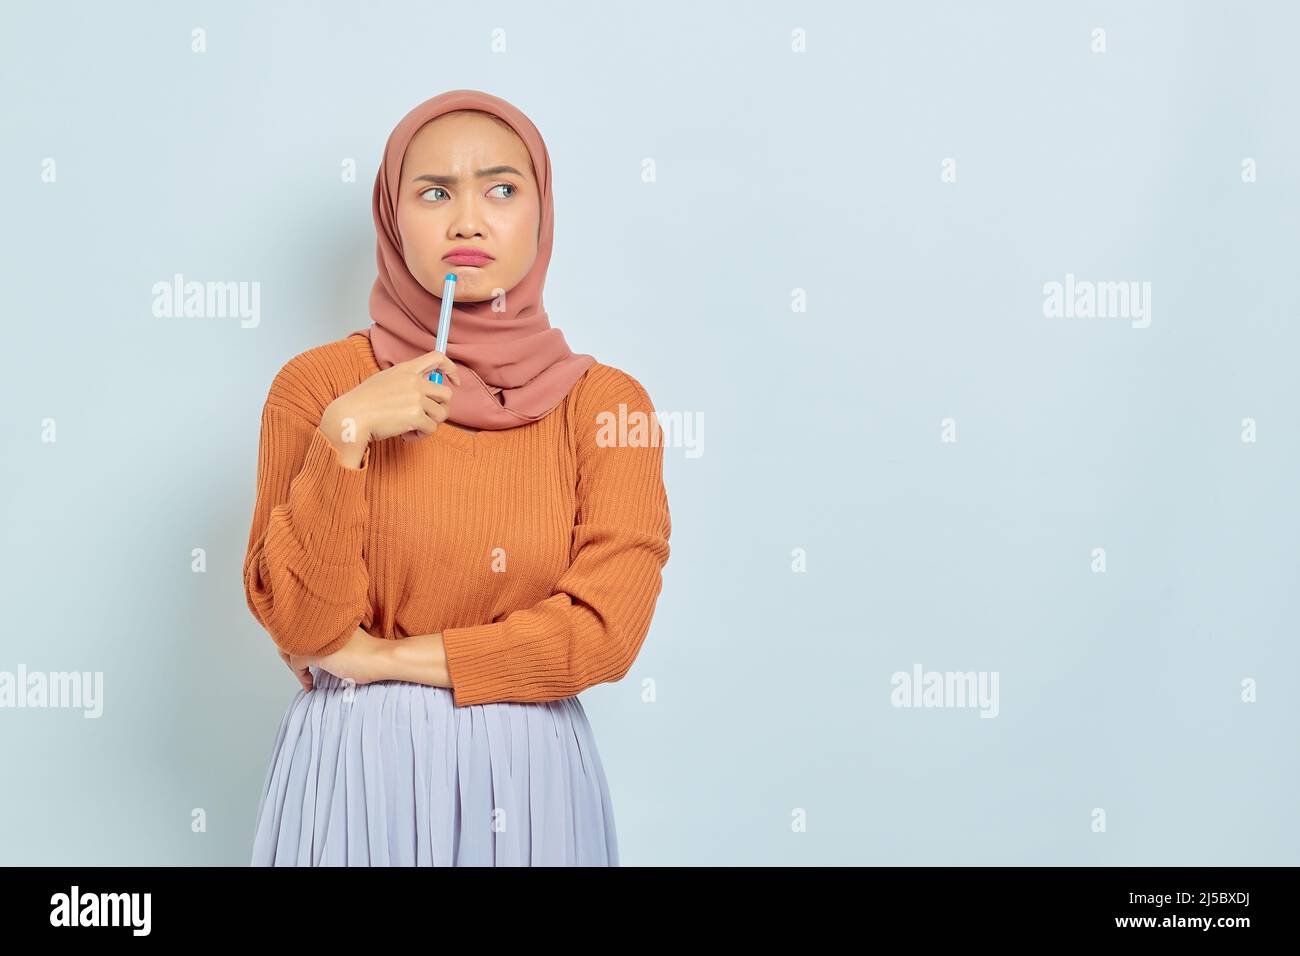 Shocked beautiful asian woman in brown sweater and hijab holding pen, looks serious thinking about a question isolated on white background. Muslim lif Stock Photo